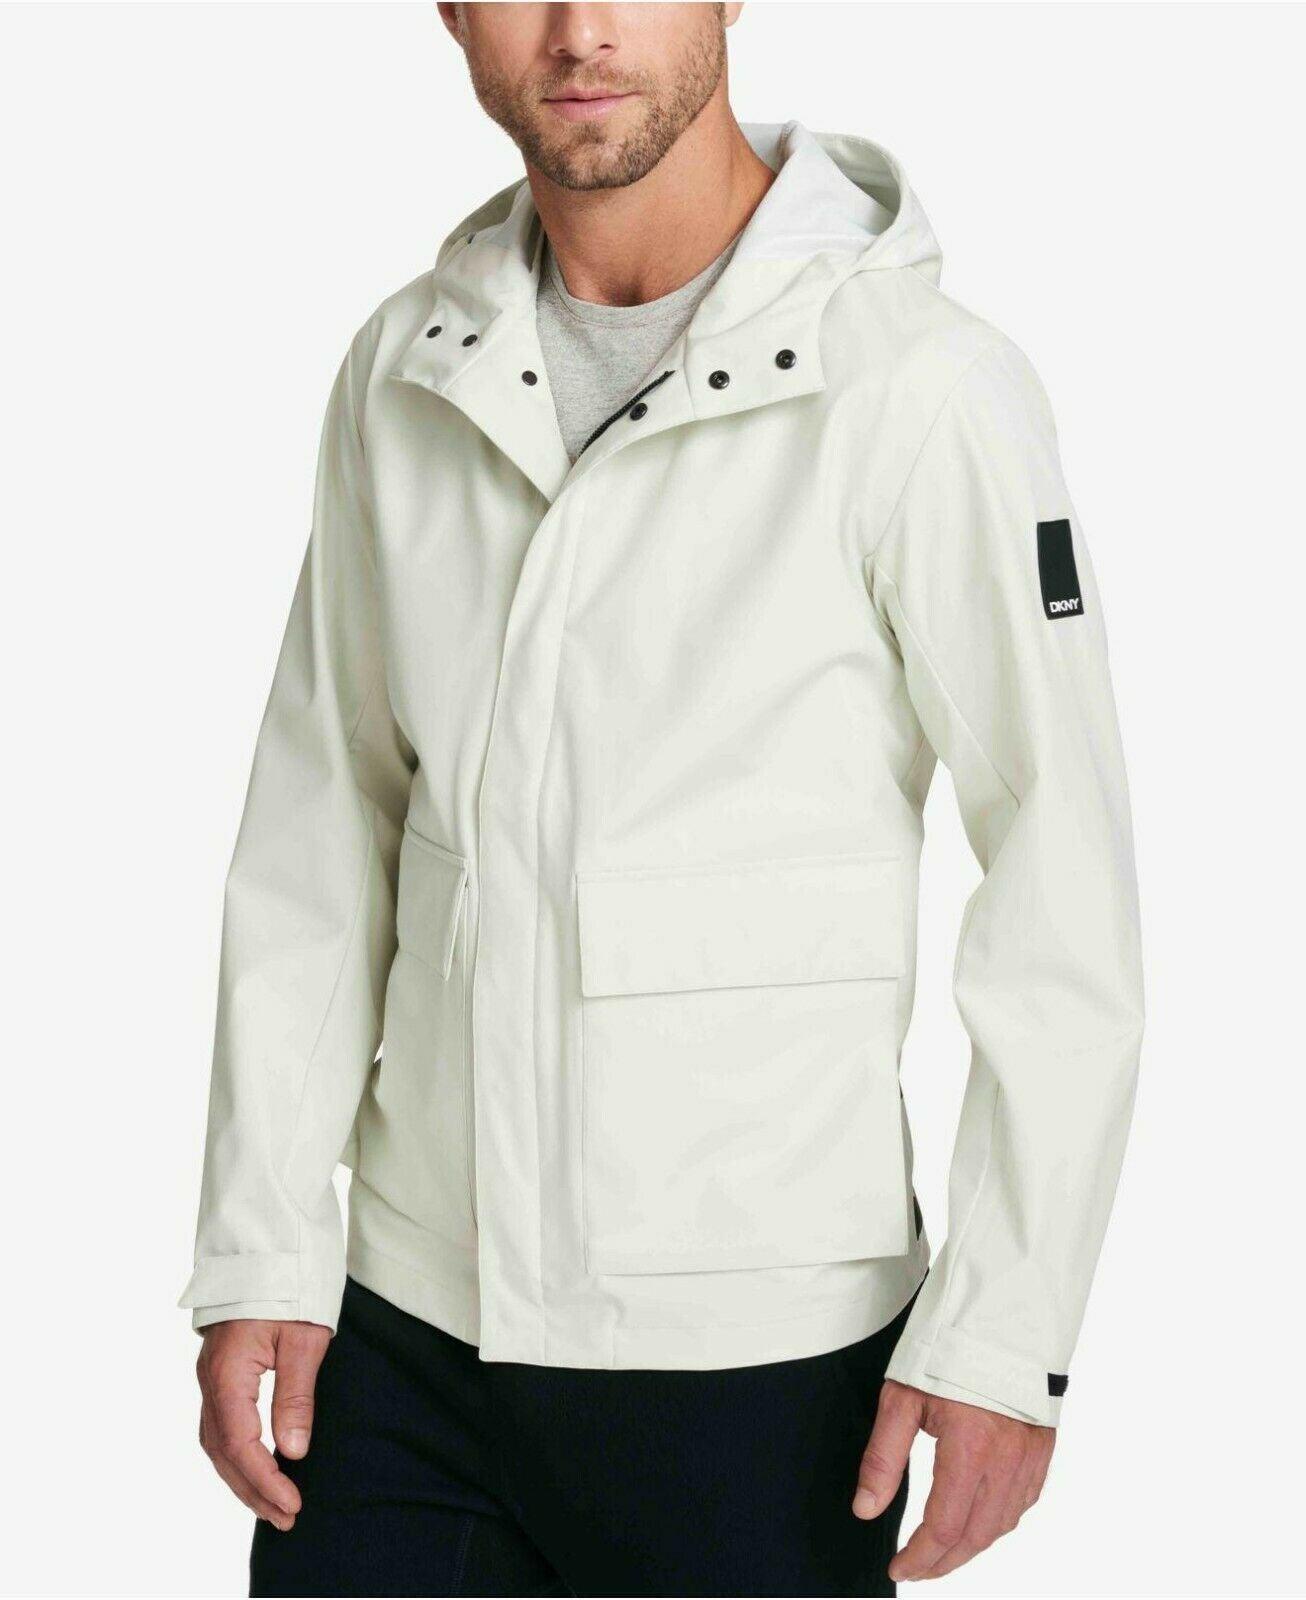 DKNY Men's Performance Water Resistant Hooded Jacket Size S - SVNYFancy